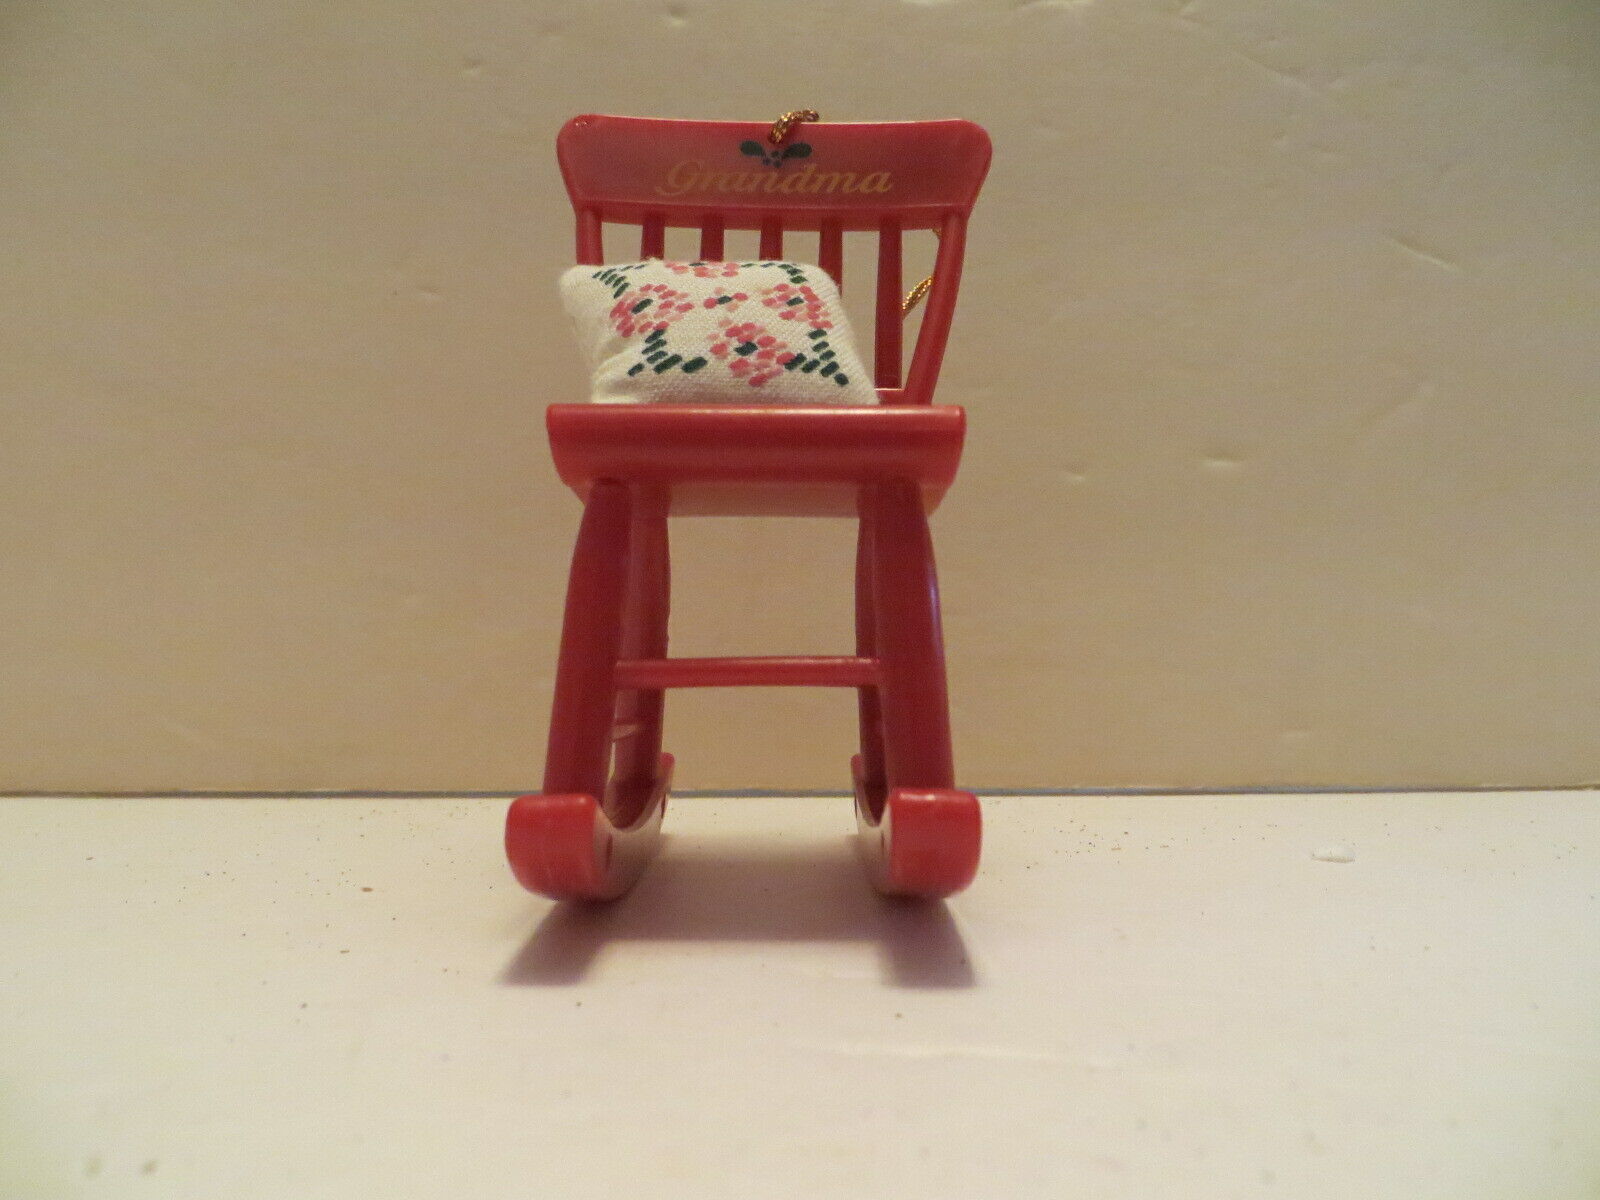 Primary image for Avon Timeless Treasures Grandma Rocking Chair Ornament